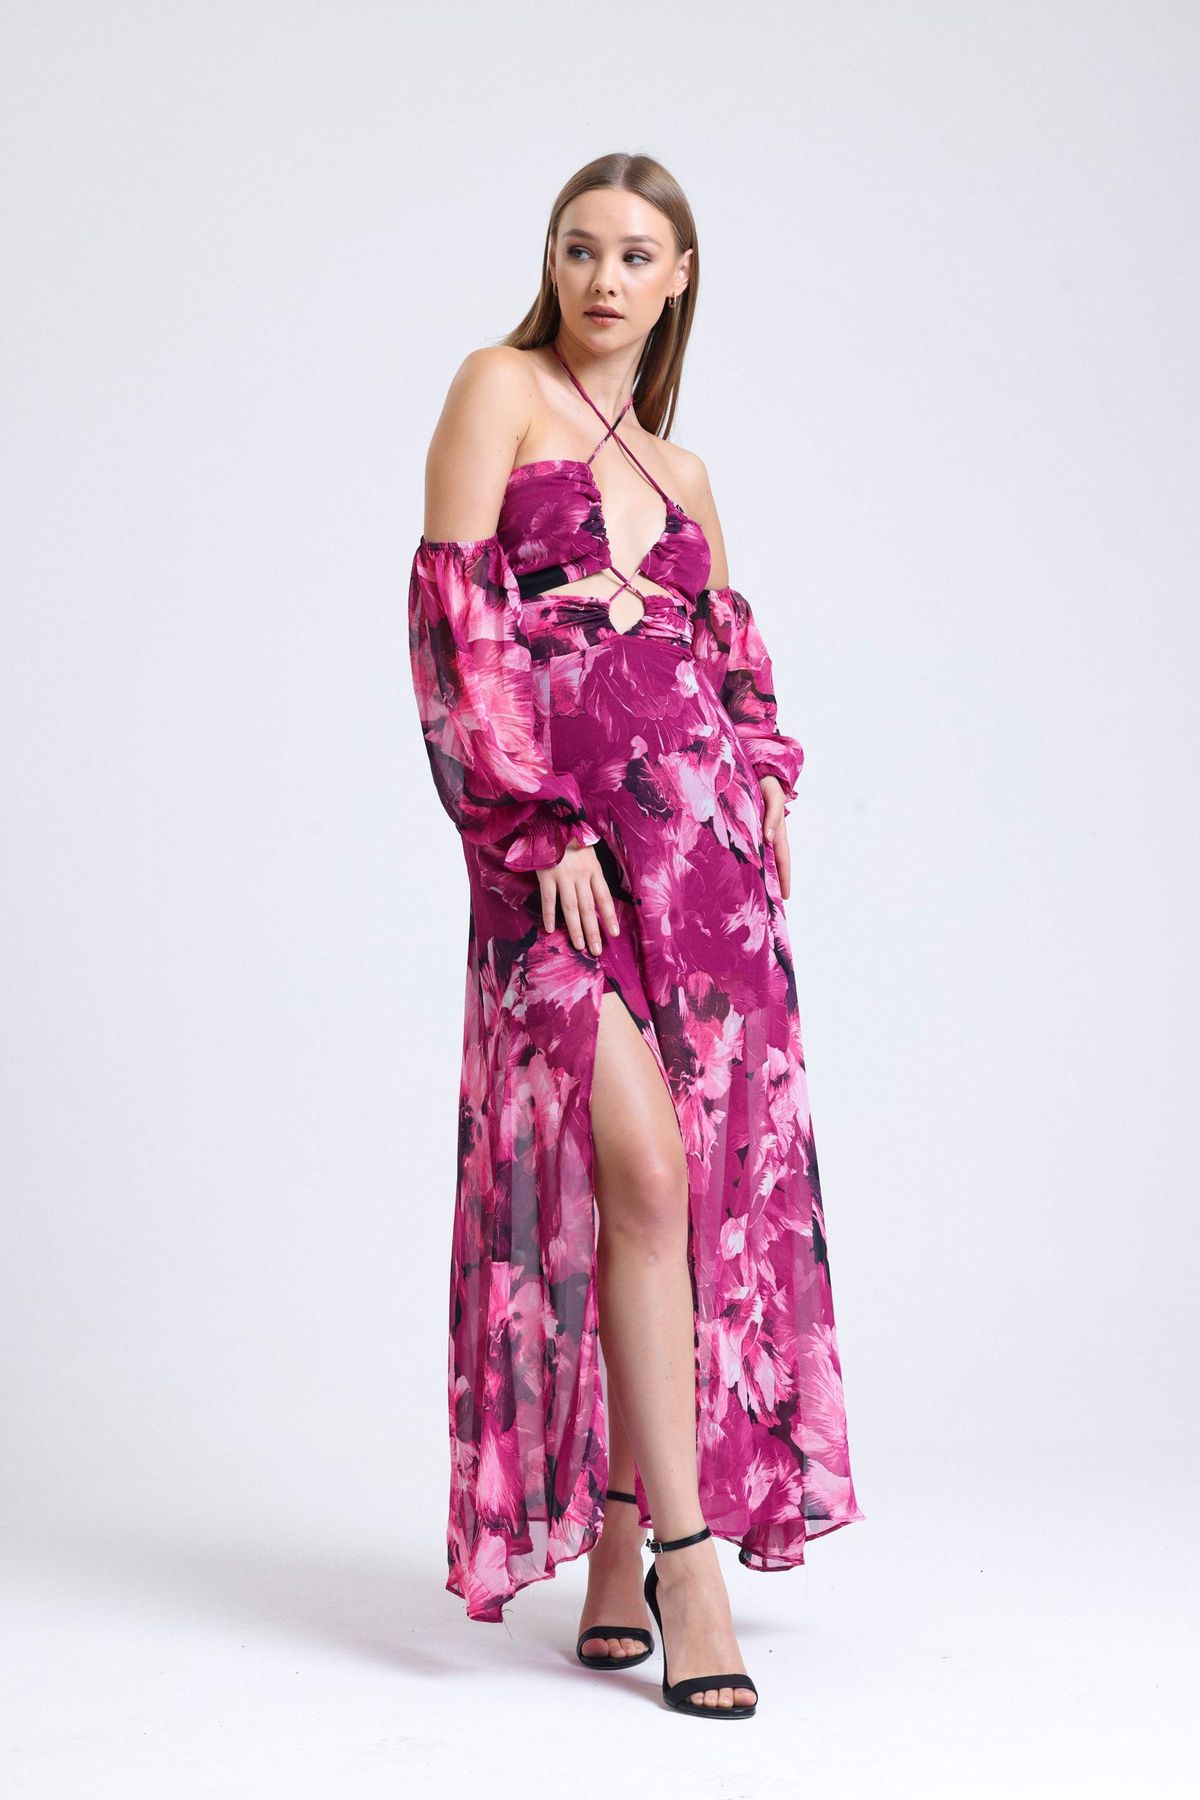 Plunge Neck Low Sleeve Maxi Dress with a Bust Cut Out